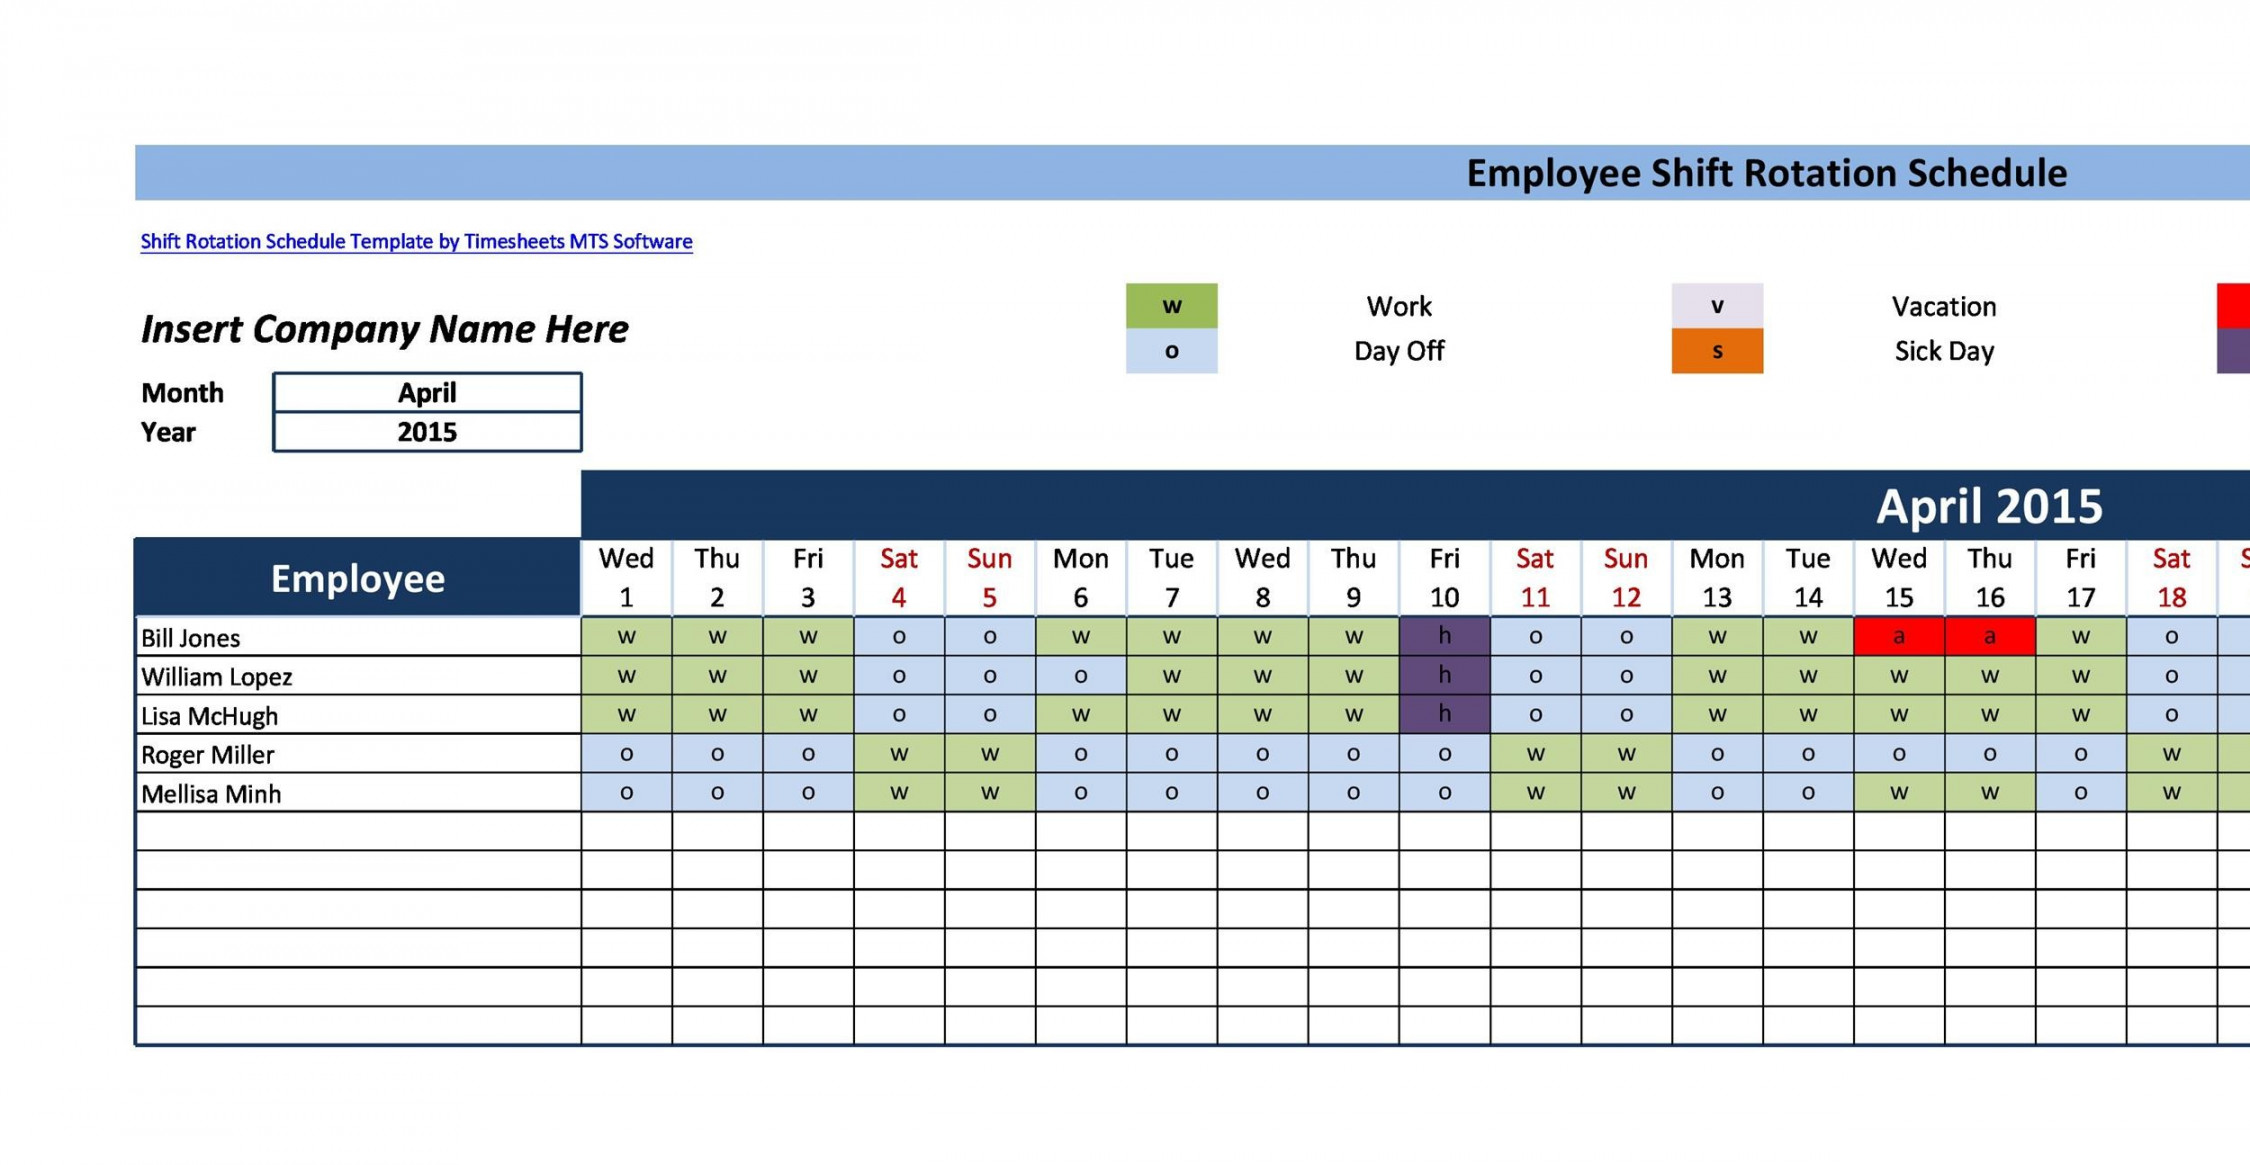 Dupont Shift Schedule Templats for any Company [Free] ᐅ